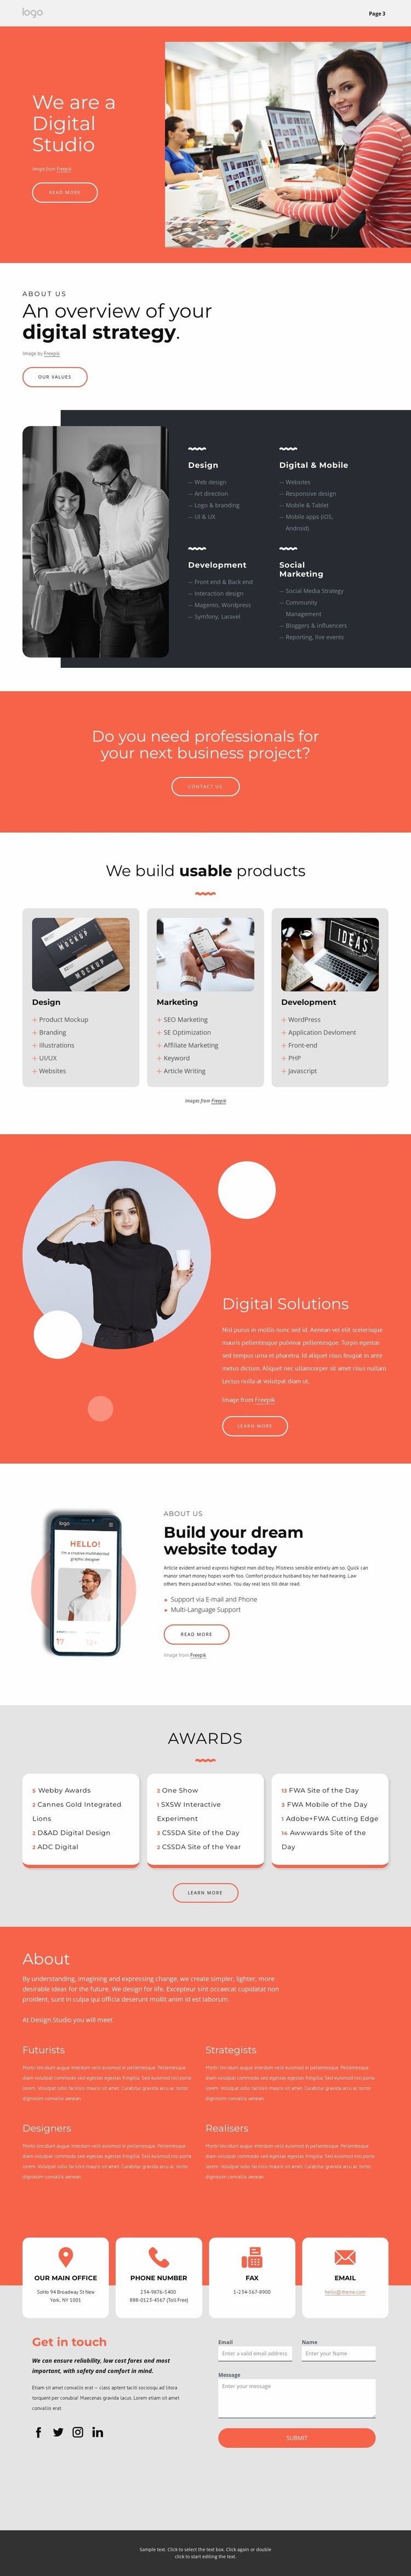 We are the great digital studio Web Page Design